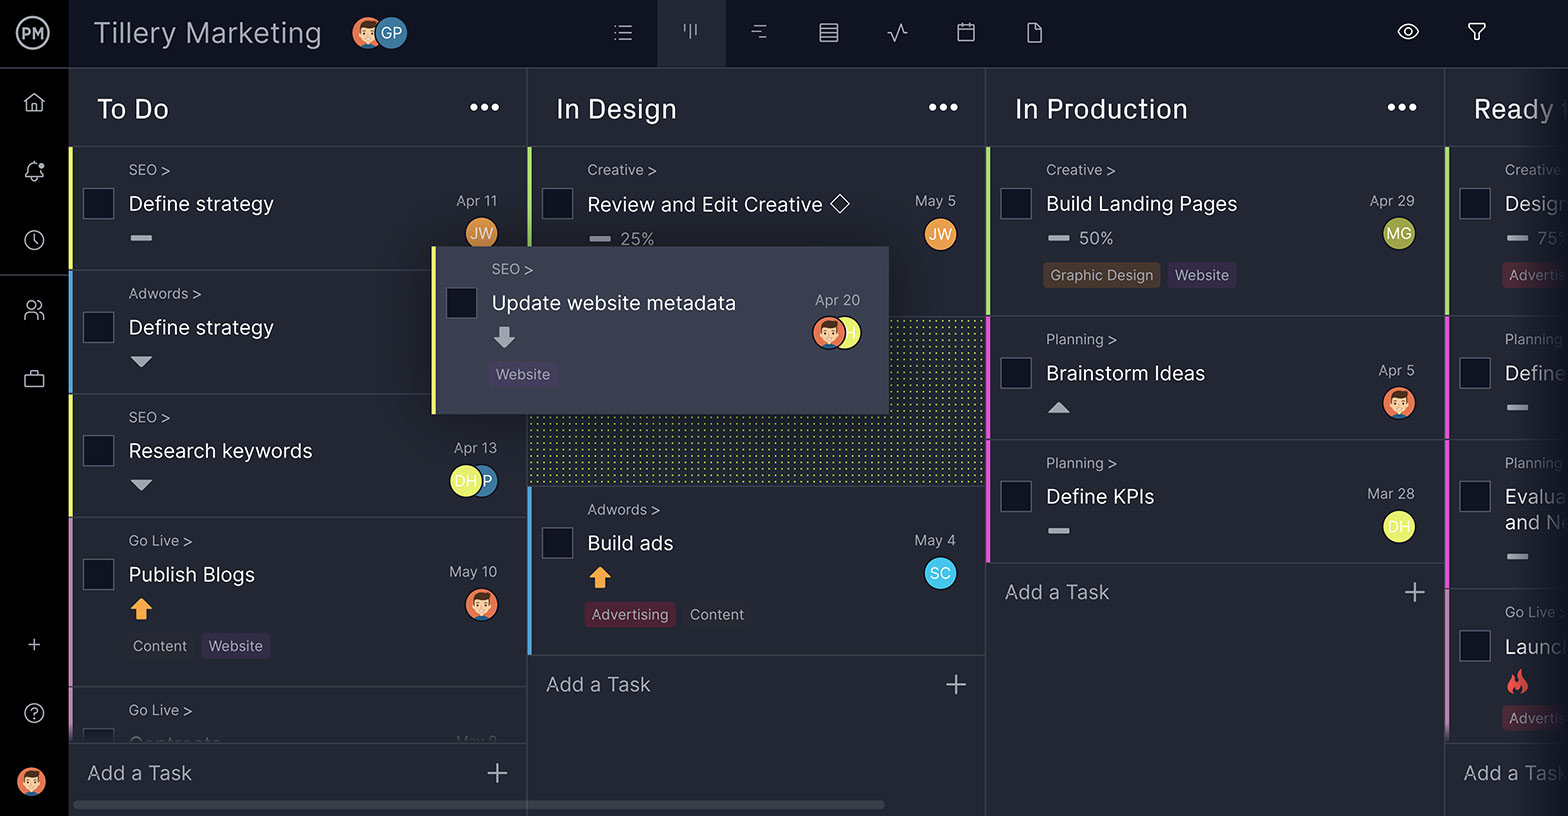 agile project management software with kanban